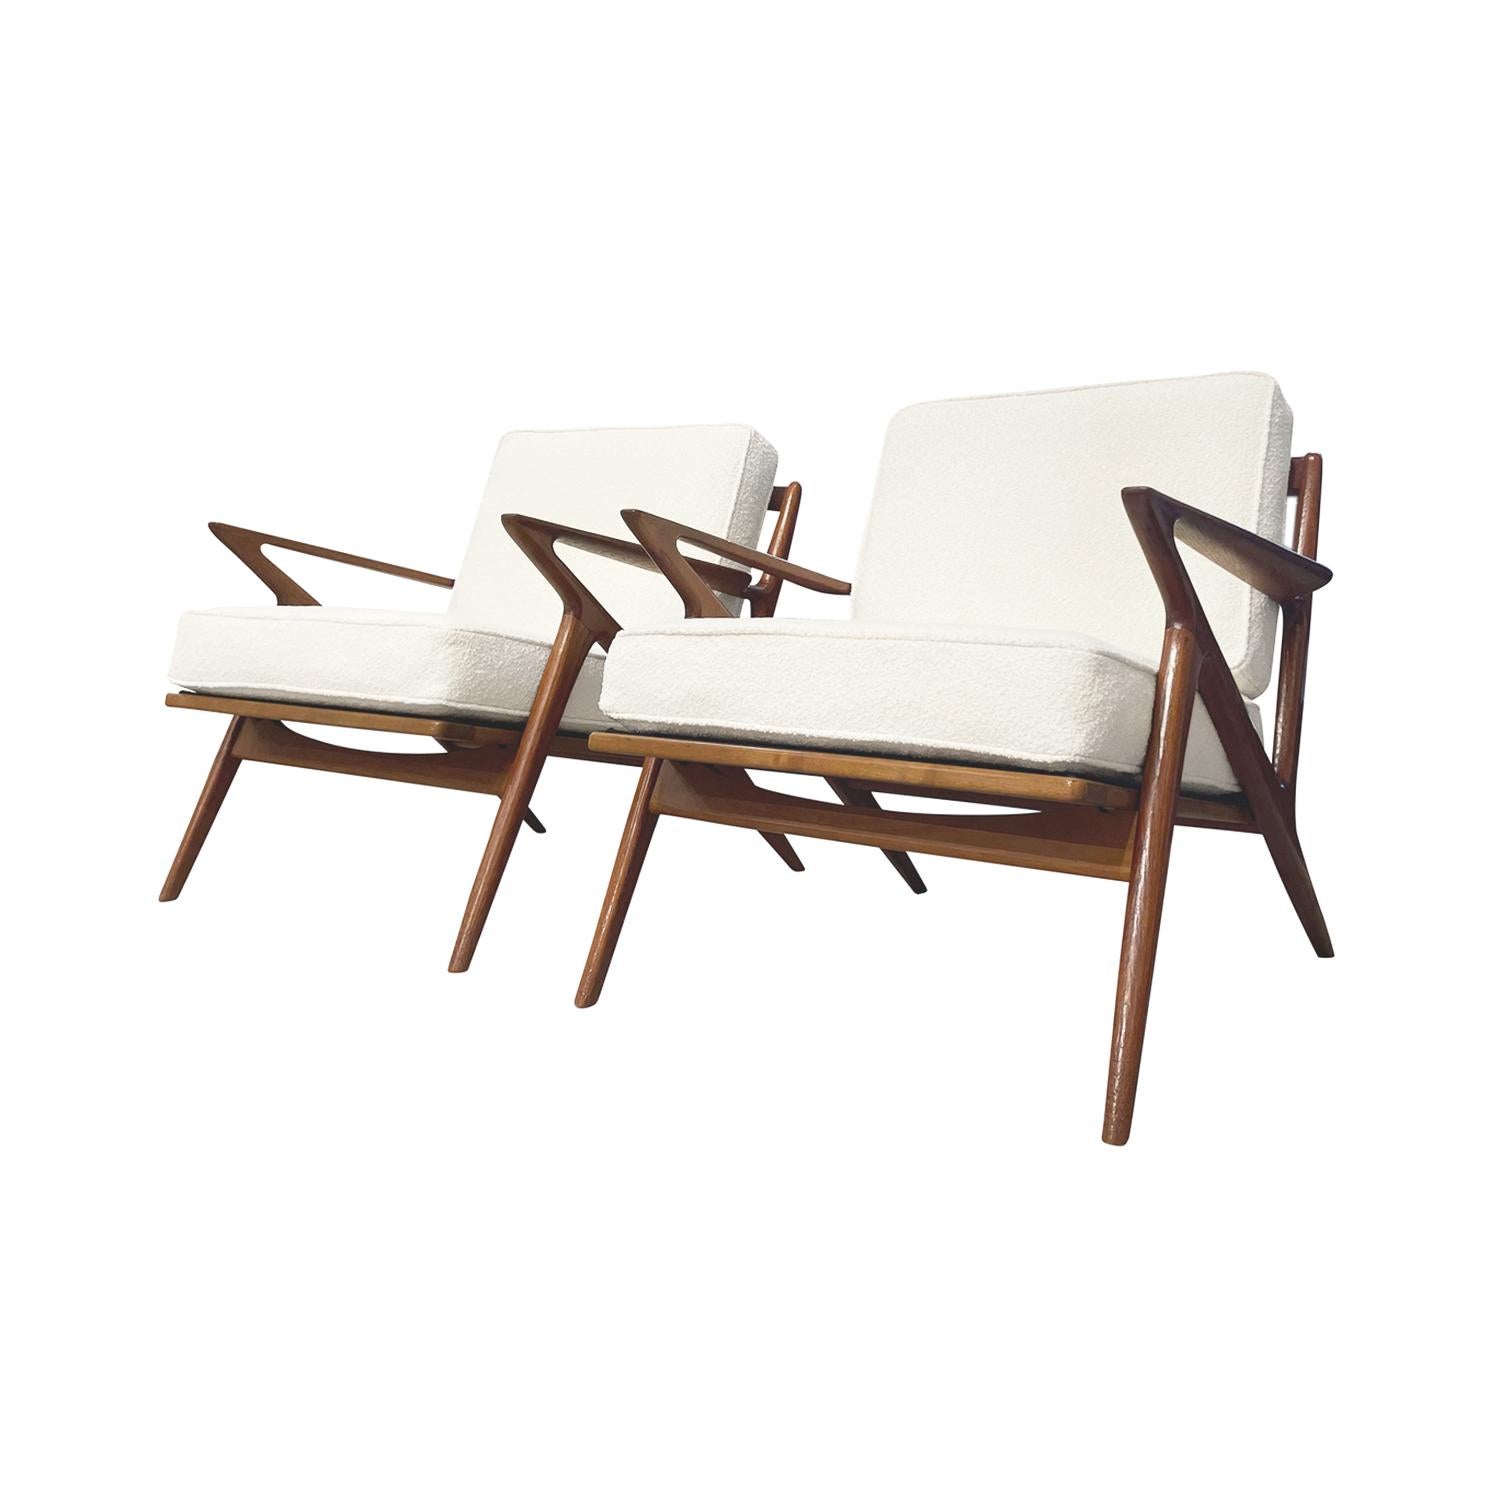 20th Century Light-Brown Danish Pair of Walnut Z Lounge Chairs by Poul Jensen In Good Condition For Sale In West Palm Beach, FL